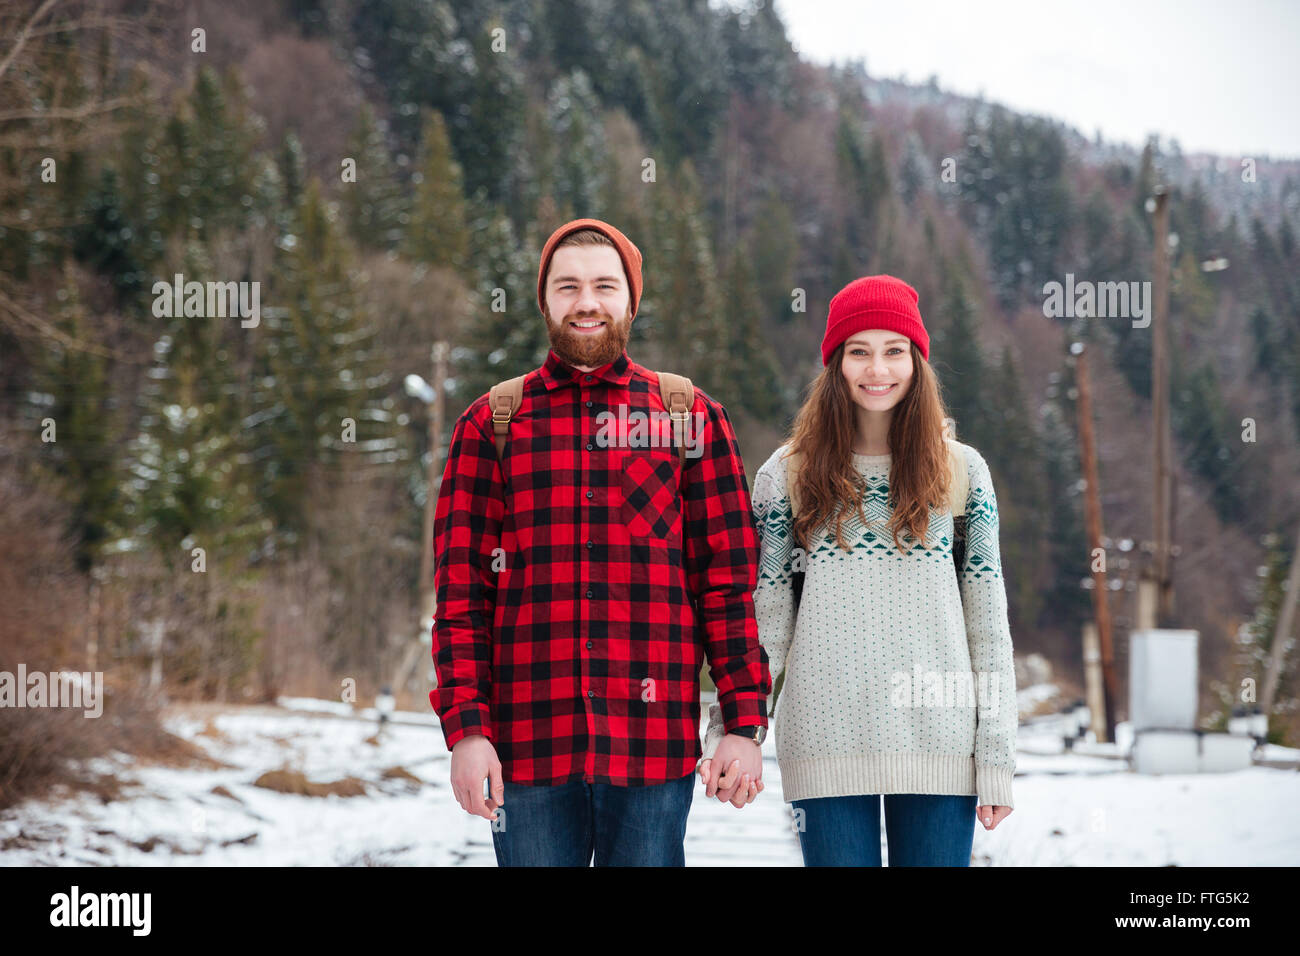 Smiling young couple traveling in winter forest Stock Photo